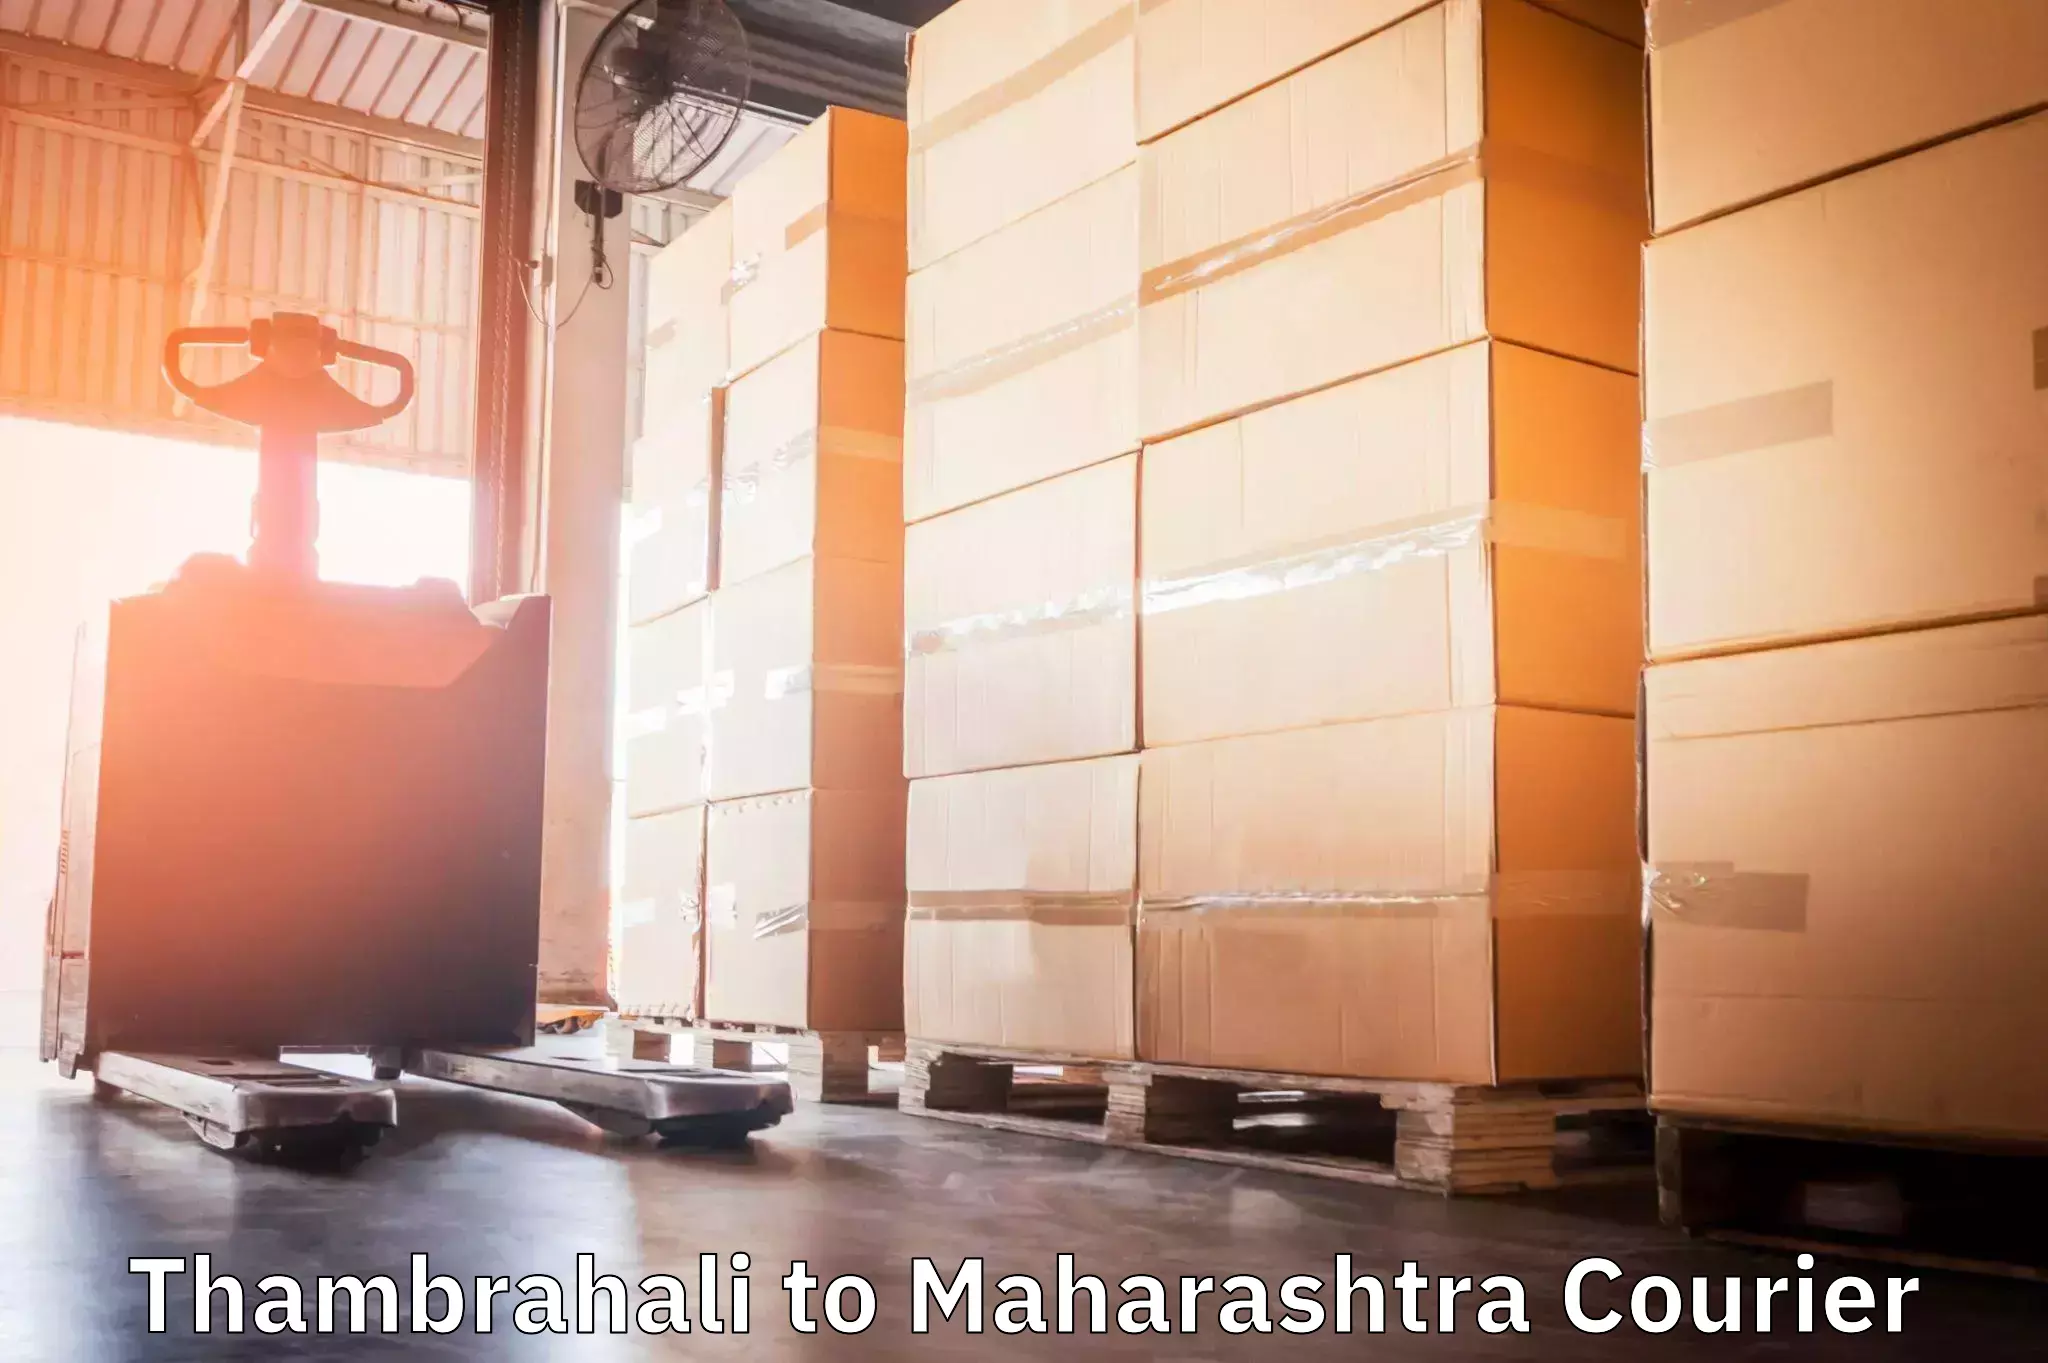 Special handling courier Thambrahali to Pune